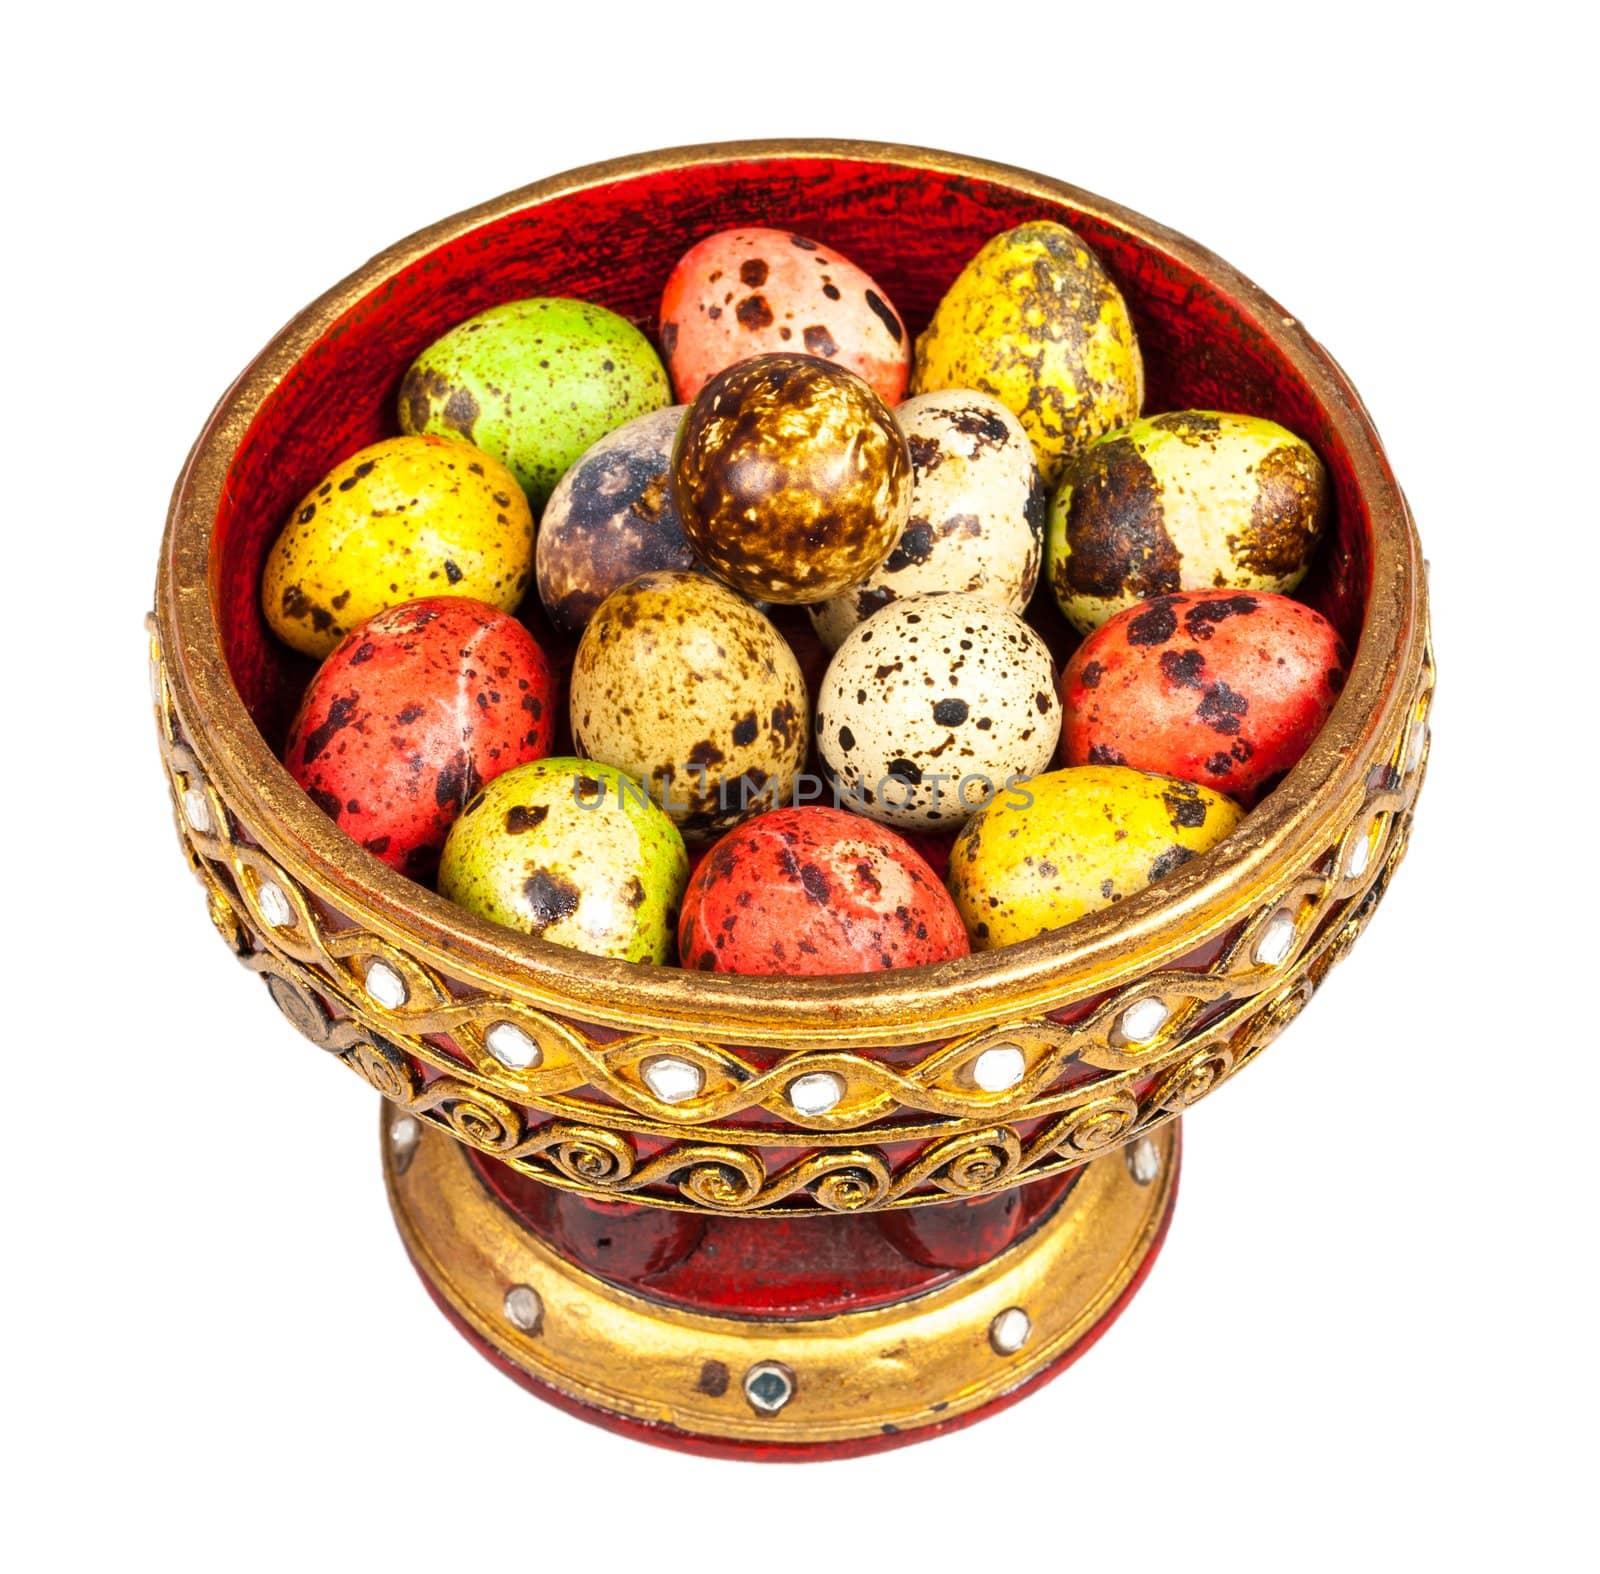 Colored quail eggs (little bird eggs) in Lanna tray on Easter Day